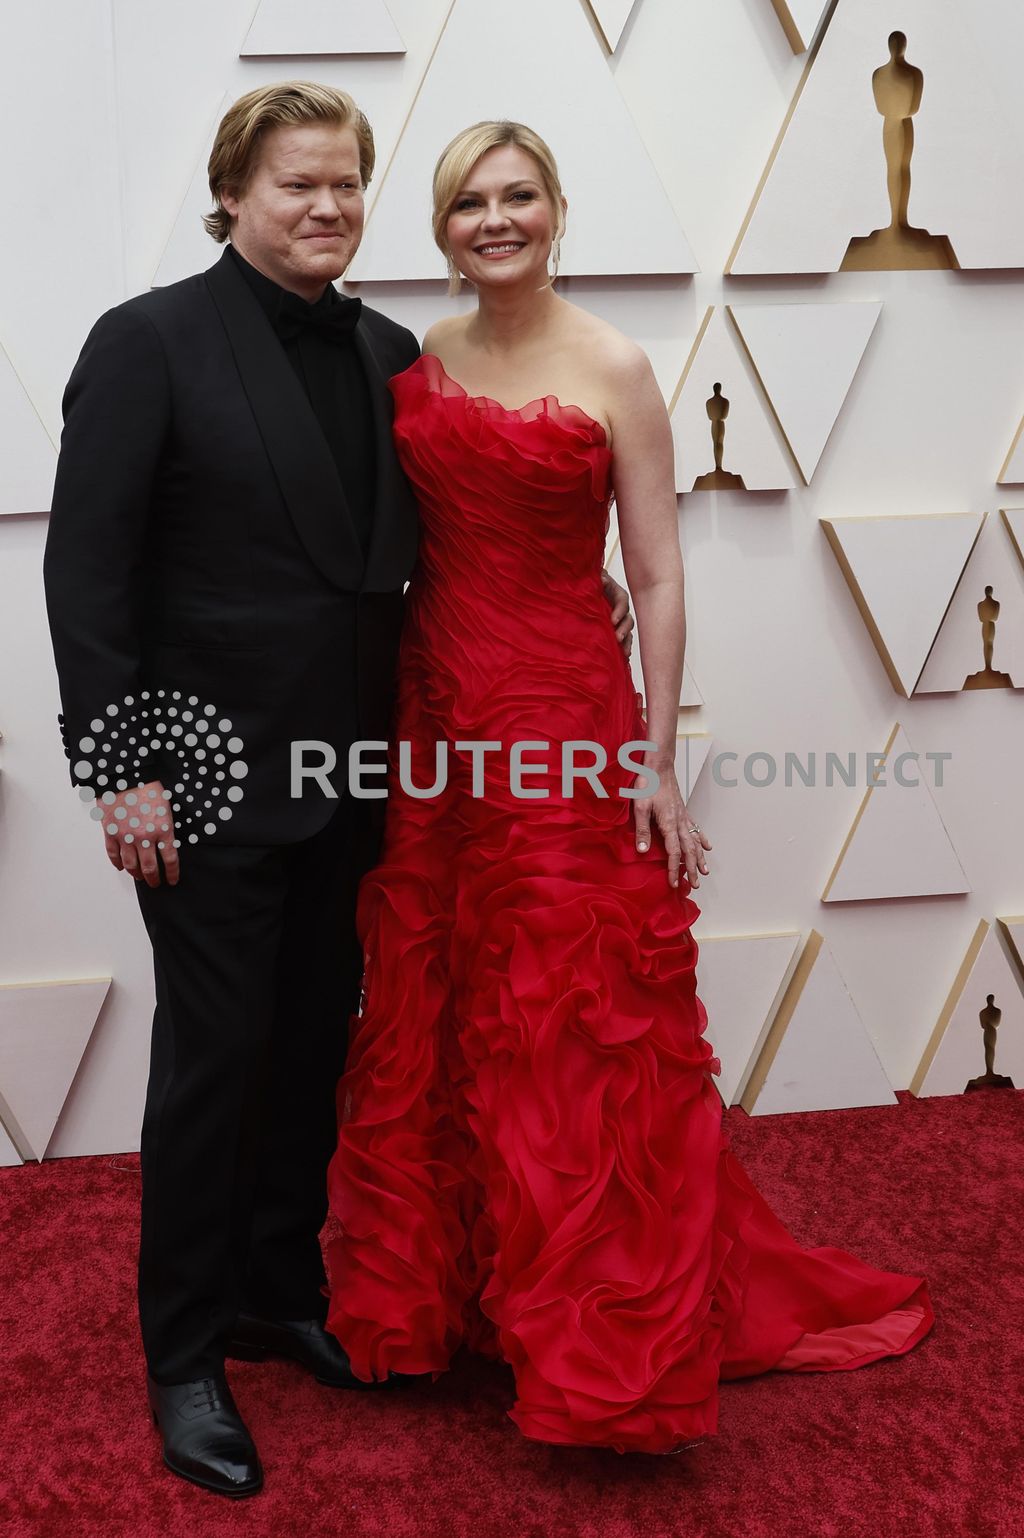 Kirsten Dunst and husband Jesse Plemons pose on the red carpet during the Oscars arrivals at the 94th Academy Awards in Hollywood, Los Angeles, California, U.S., March 27, 2022. REUTERS/Eric Gaillard